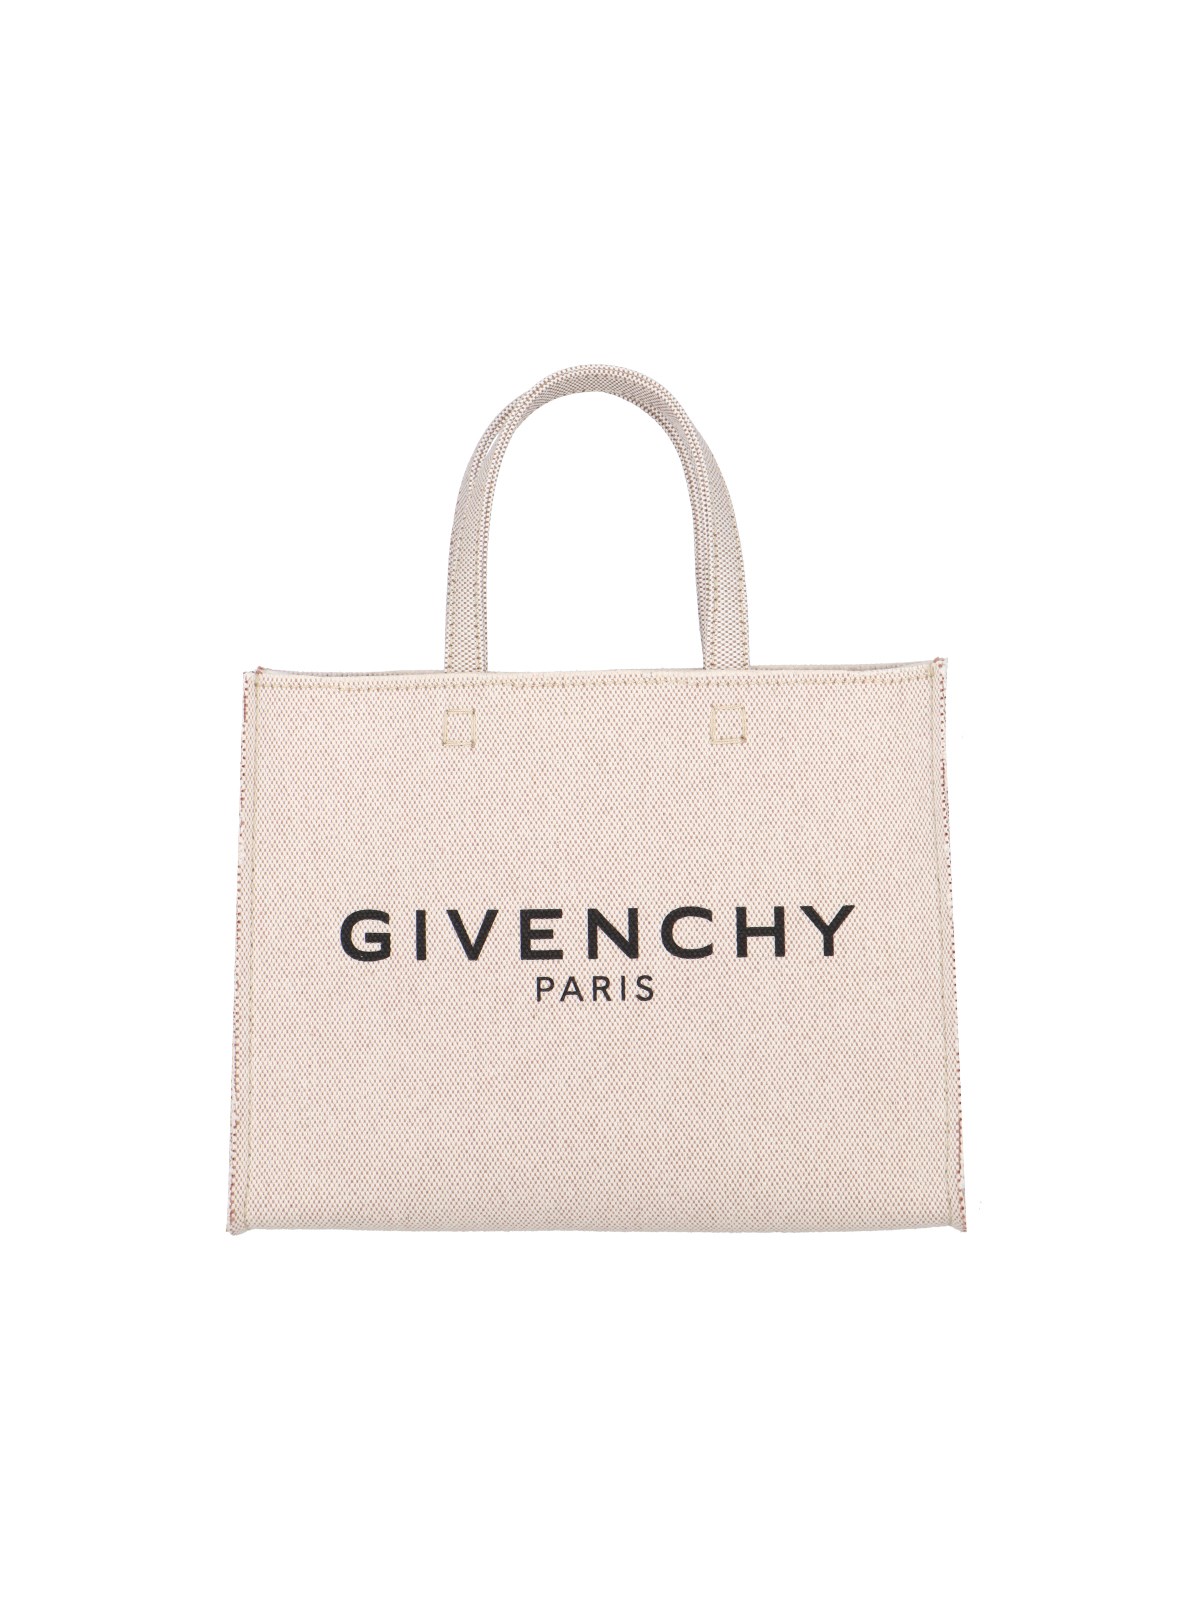 Givenchy Logo Tote Bag In Beige